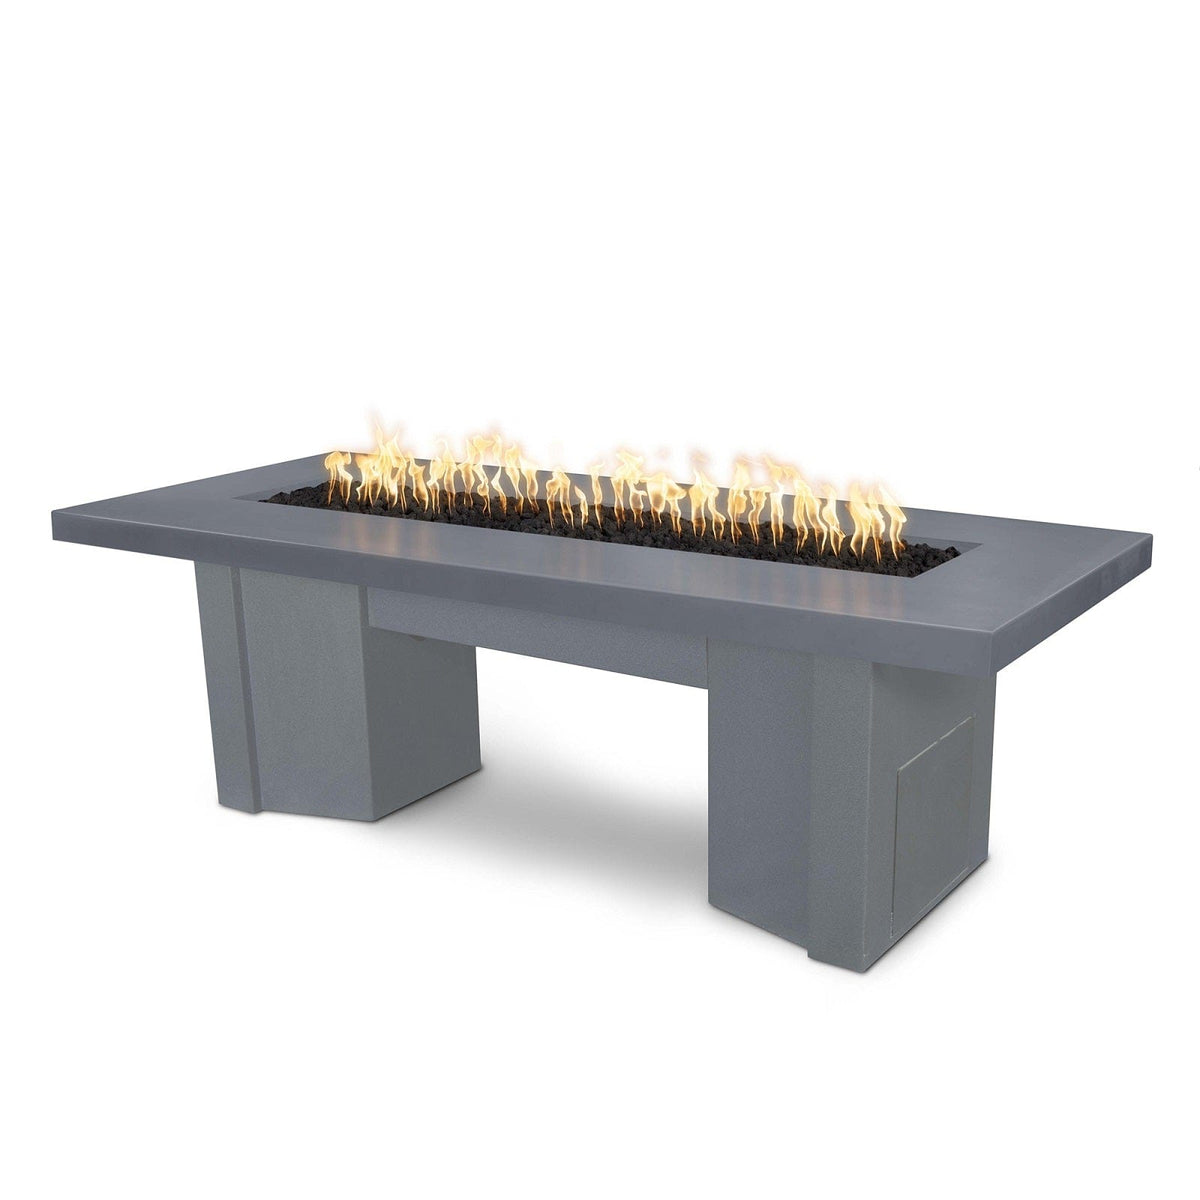 The Outdoor Plus Fire Features Gray (-GRY) / Gray Powder Coated Steel (-GRY) The Outdoor Plus 78&quot; Alameda Fire Table Smooth Concrete in Liquid Propane - 12V Electronic Ignition / OPT-ALMGFRC78E12V-LP